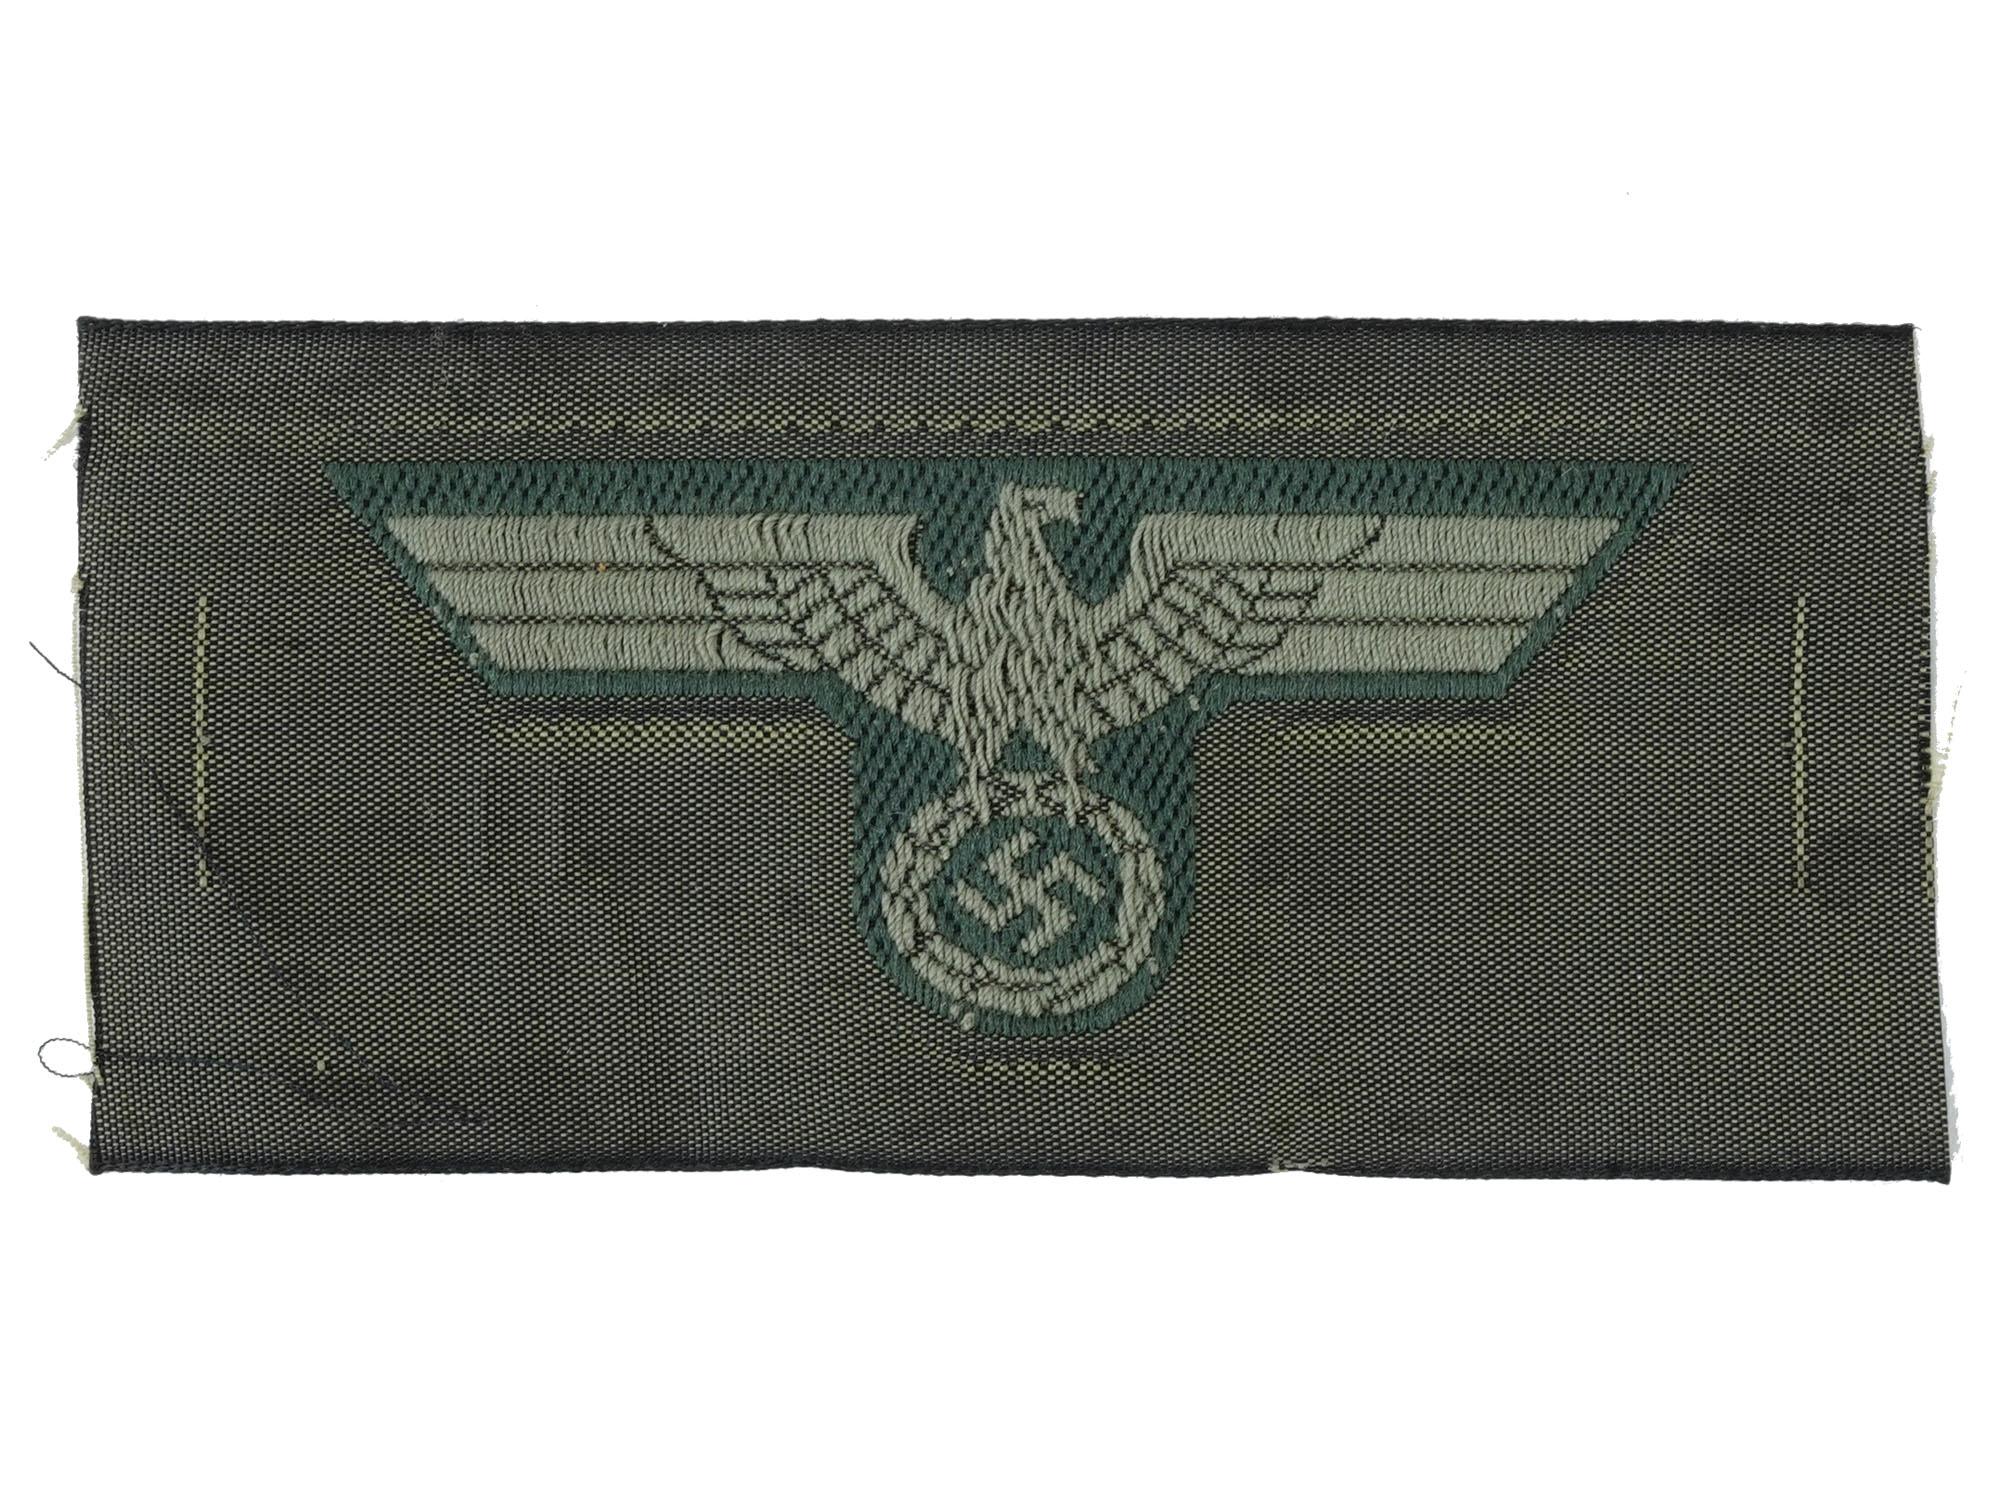 WWII NAZI GERMAN FABRIC UNIFORM PATCHES 15 ITEMS PIC-4